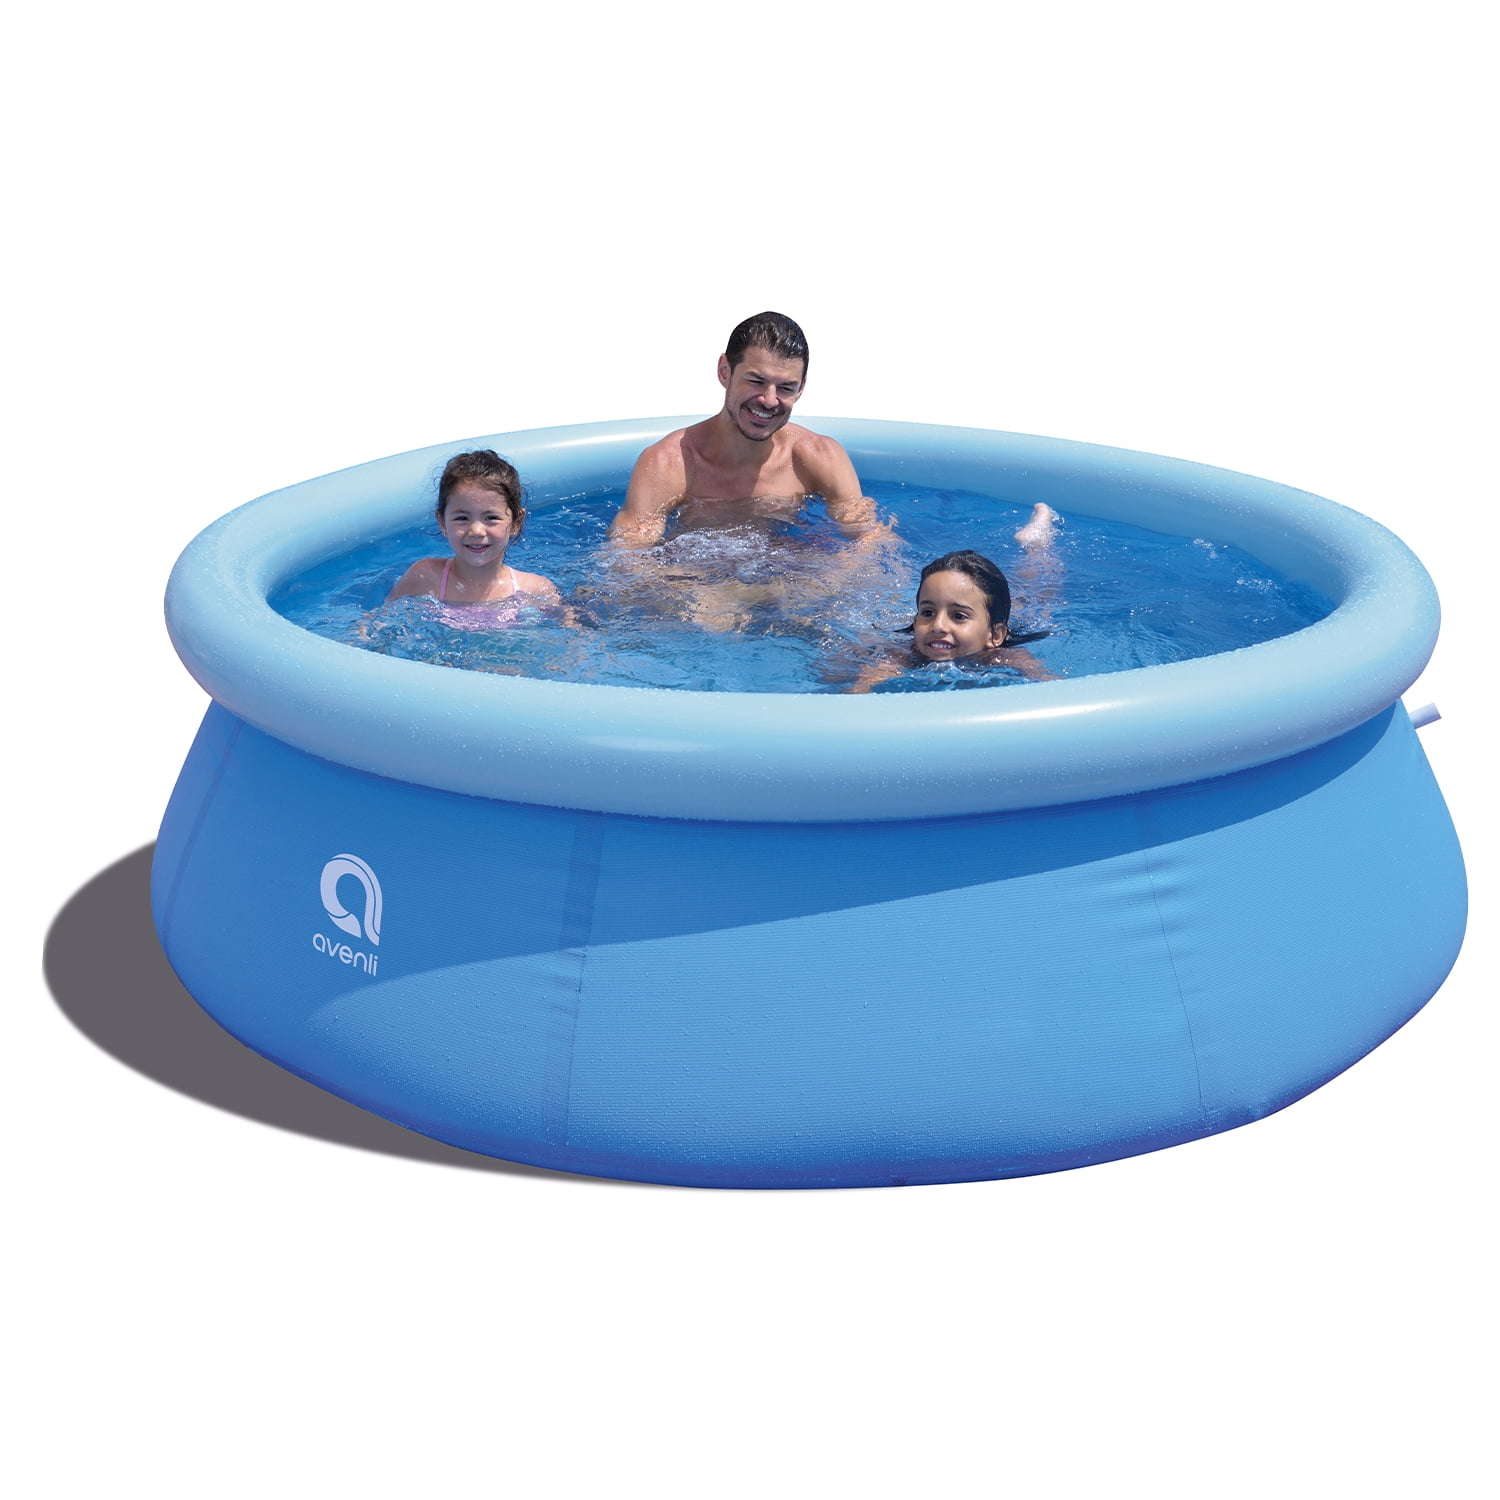 Frozen Swimming Ring Inflatable Unisex Kids Water Fun Swimming Pool Acessory 